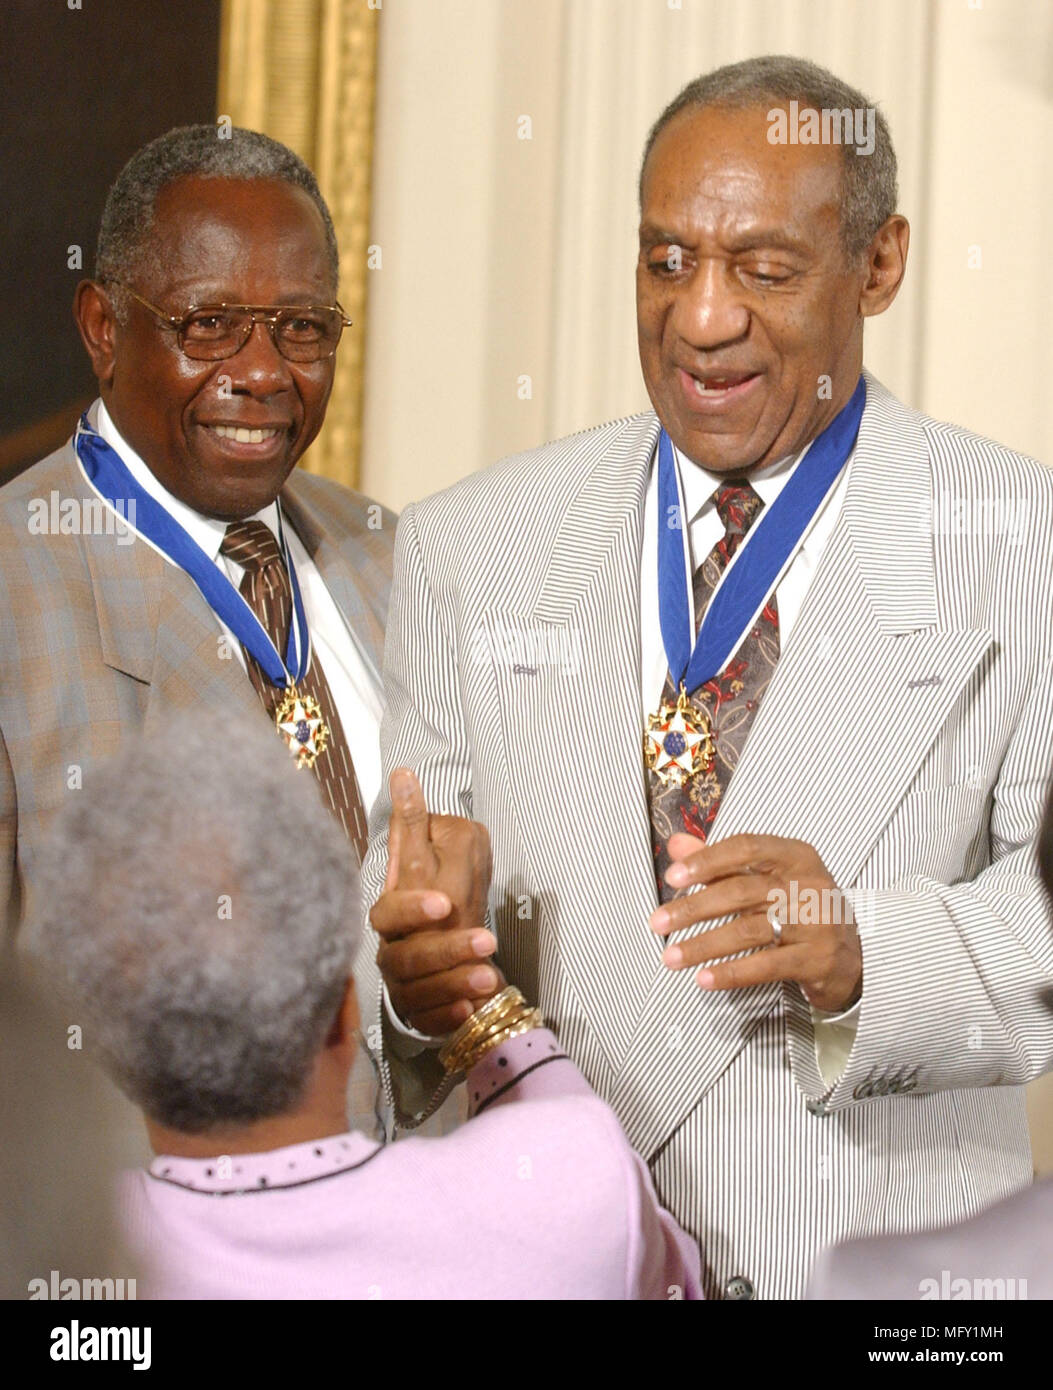 Washington, USA. 09th July, 2002. FILED - Hank Aaron and Bill Cosby accept congratulations after they received the Presidential Medal of Freedom from United States President George W. Bush during a ceremony in the East Room of the White House in Washington, DC on July 9, 2002.Credit: Ron Sachs/CNP - NO WIRE SERVICE · Credit: Ron Sachs/Consolidated News Photos/Ron Sachs/CNP/dpa/Alamy Live News Stock Photo